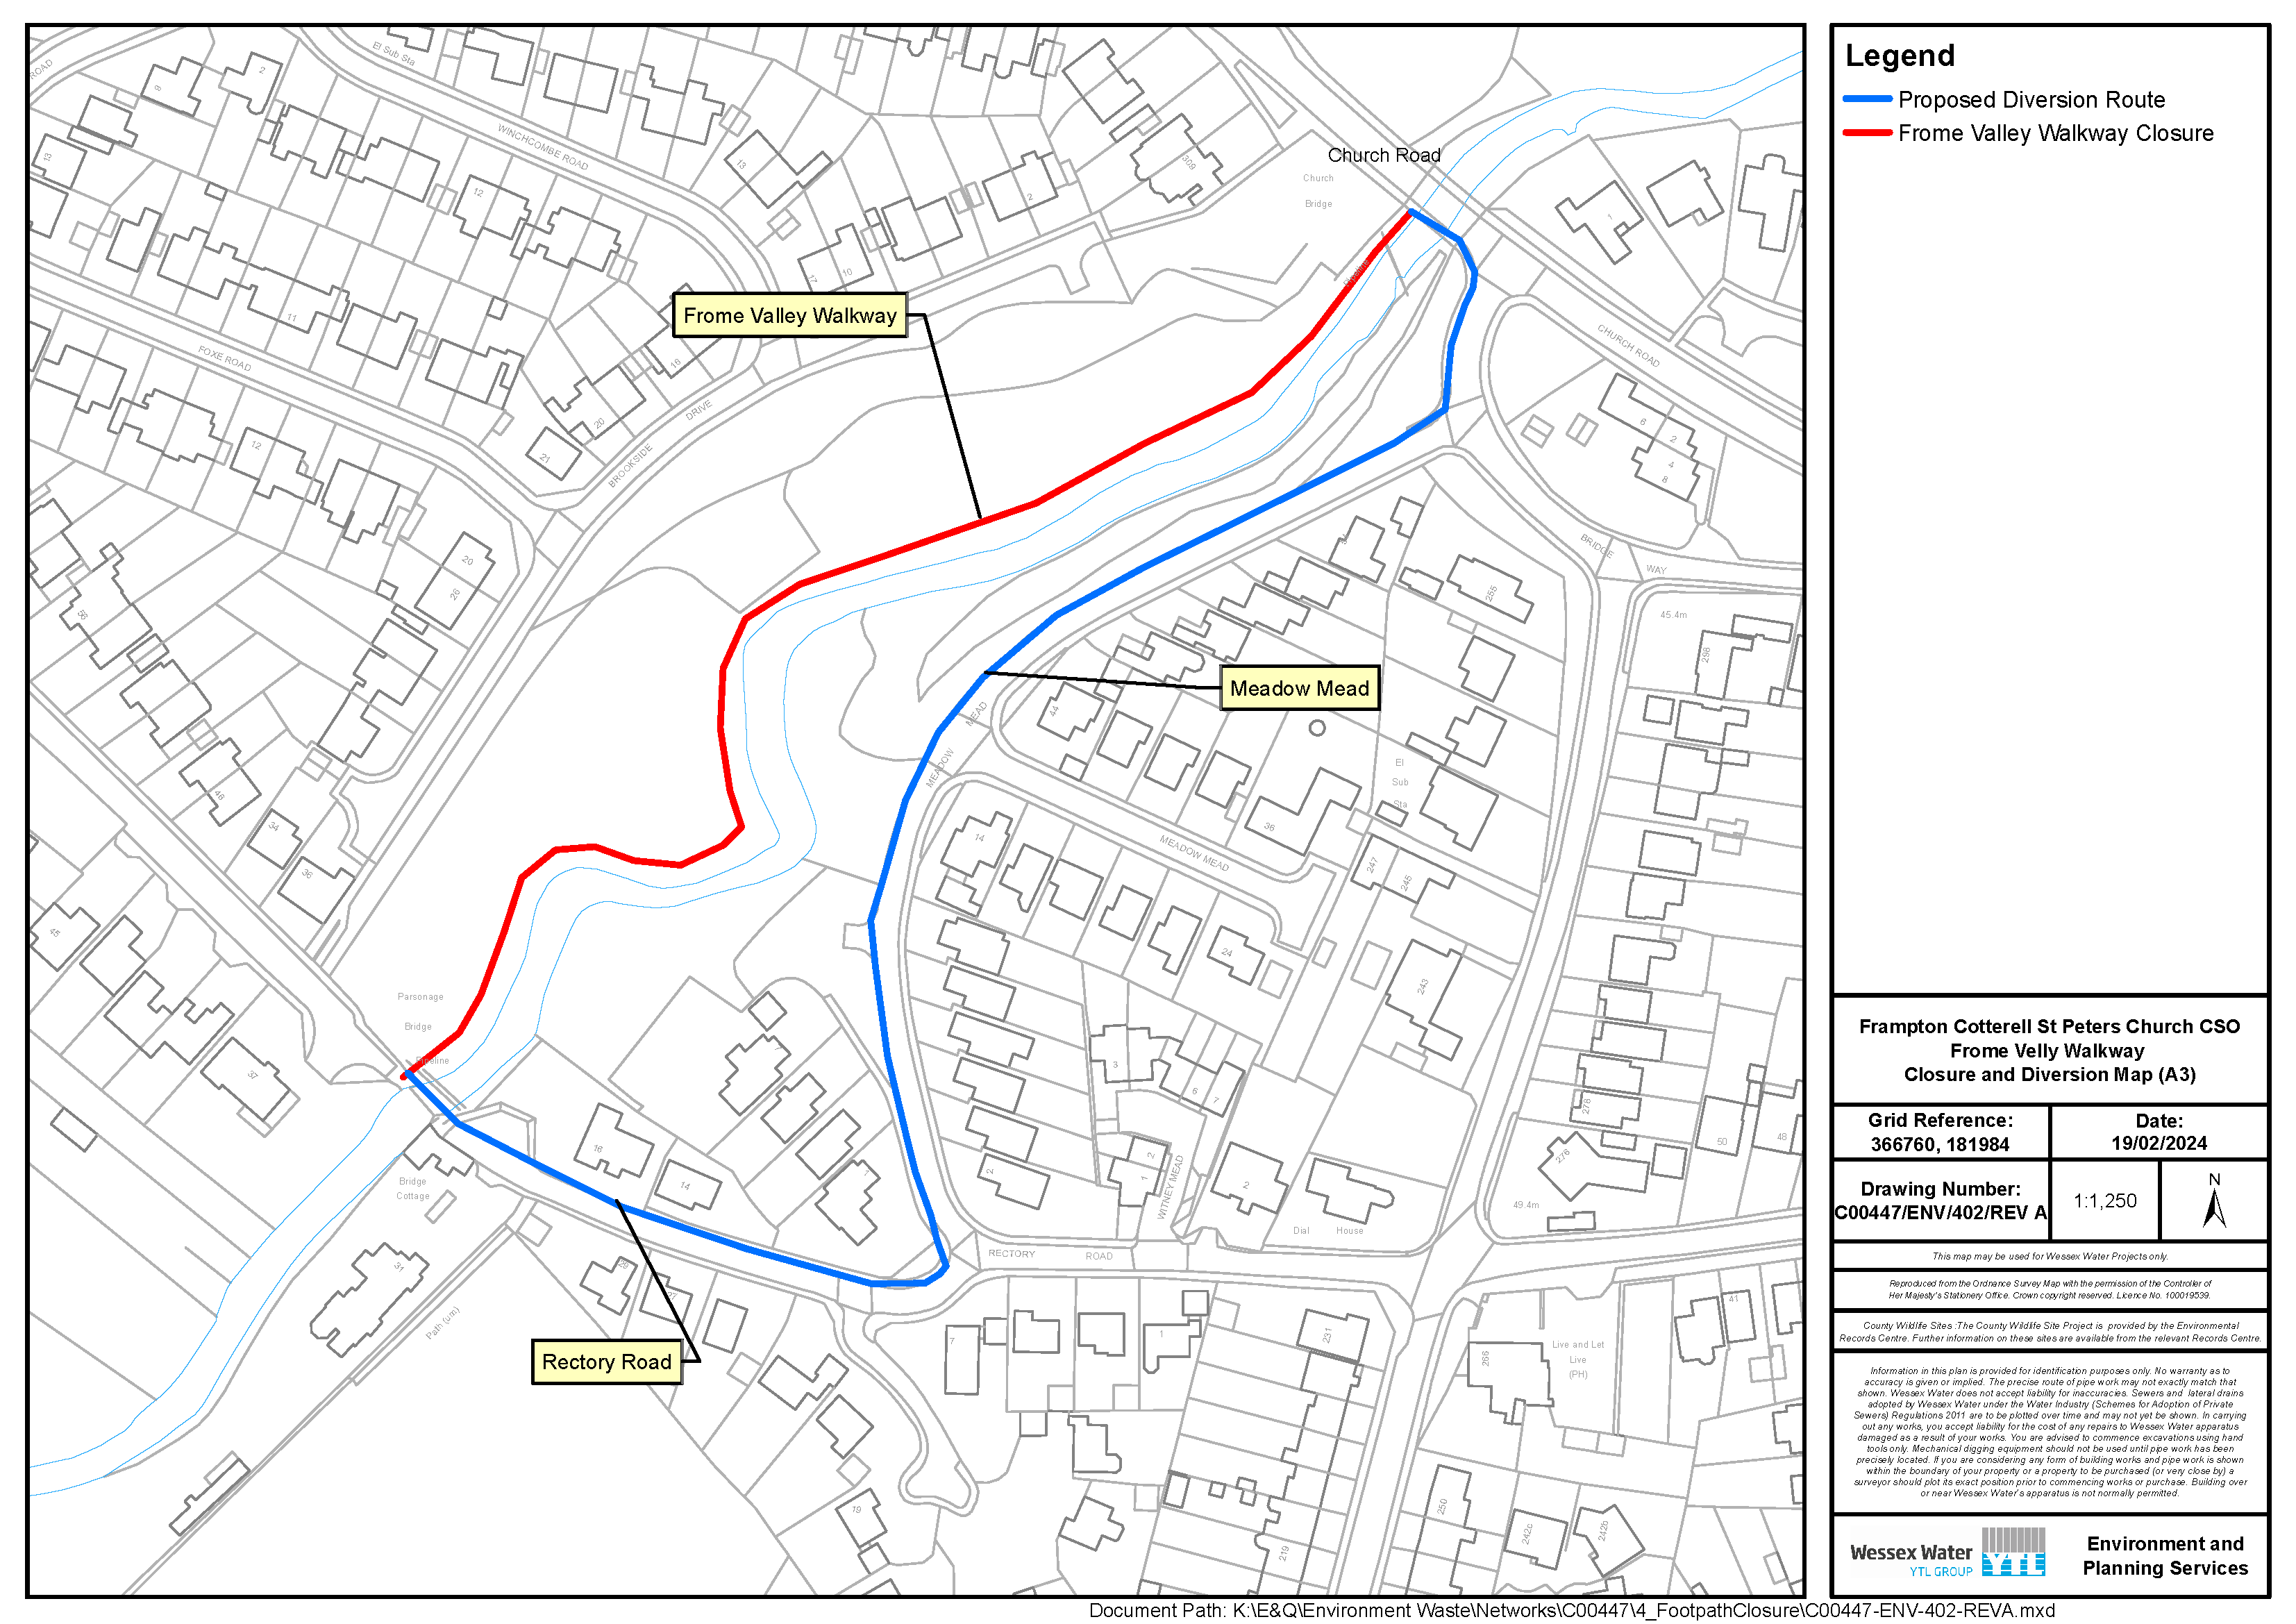 A map showing the areas of the Frome Valley Walkway planned for closure and the proposed diversion route. The diversion route has points labelled "Meadow Mead" to the east and Rectory Road to the south. Grid Reference: 366760, 181984. Date 19/02/2024. Drawing Number: C00447/ENV/402/REV A. Scale: 1:1:250.